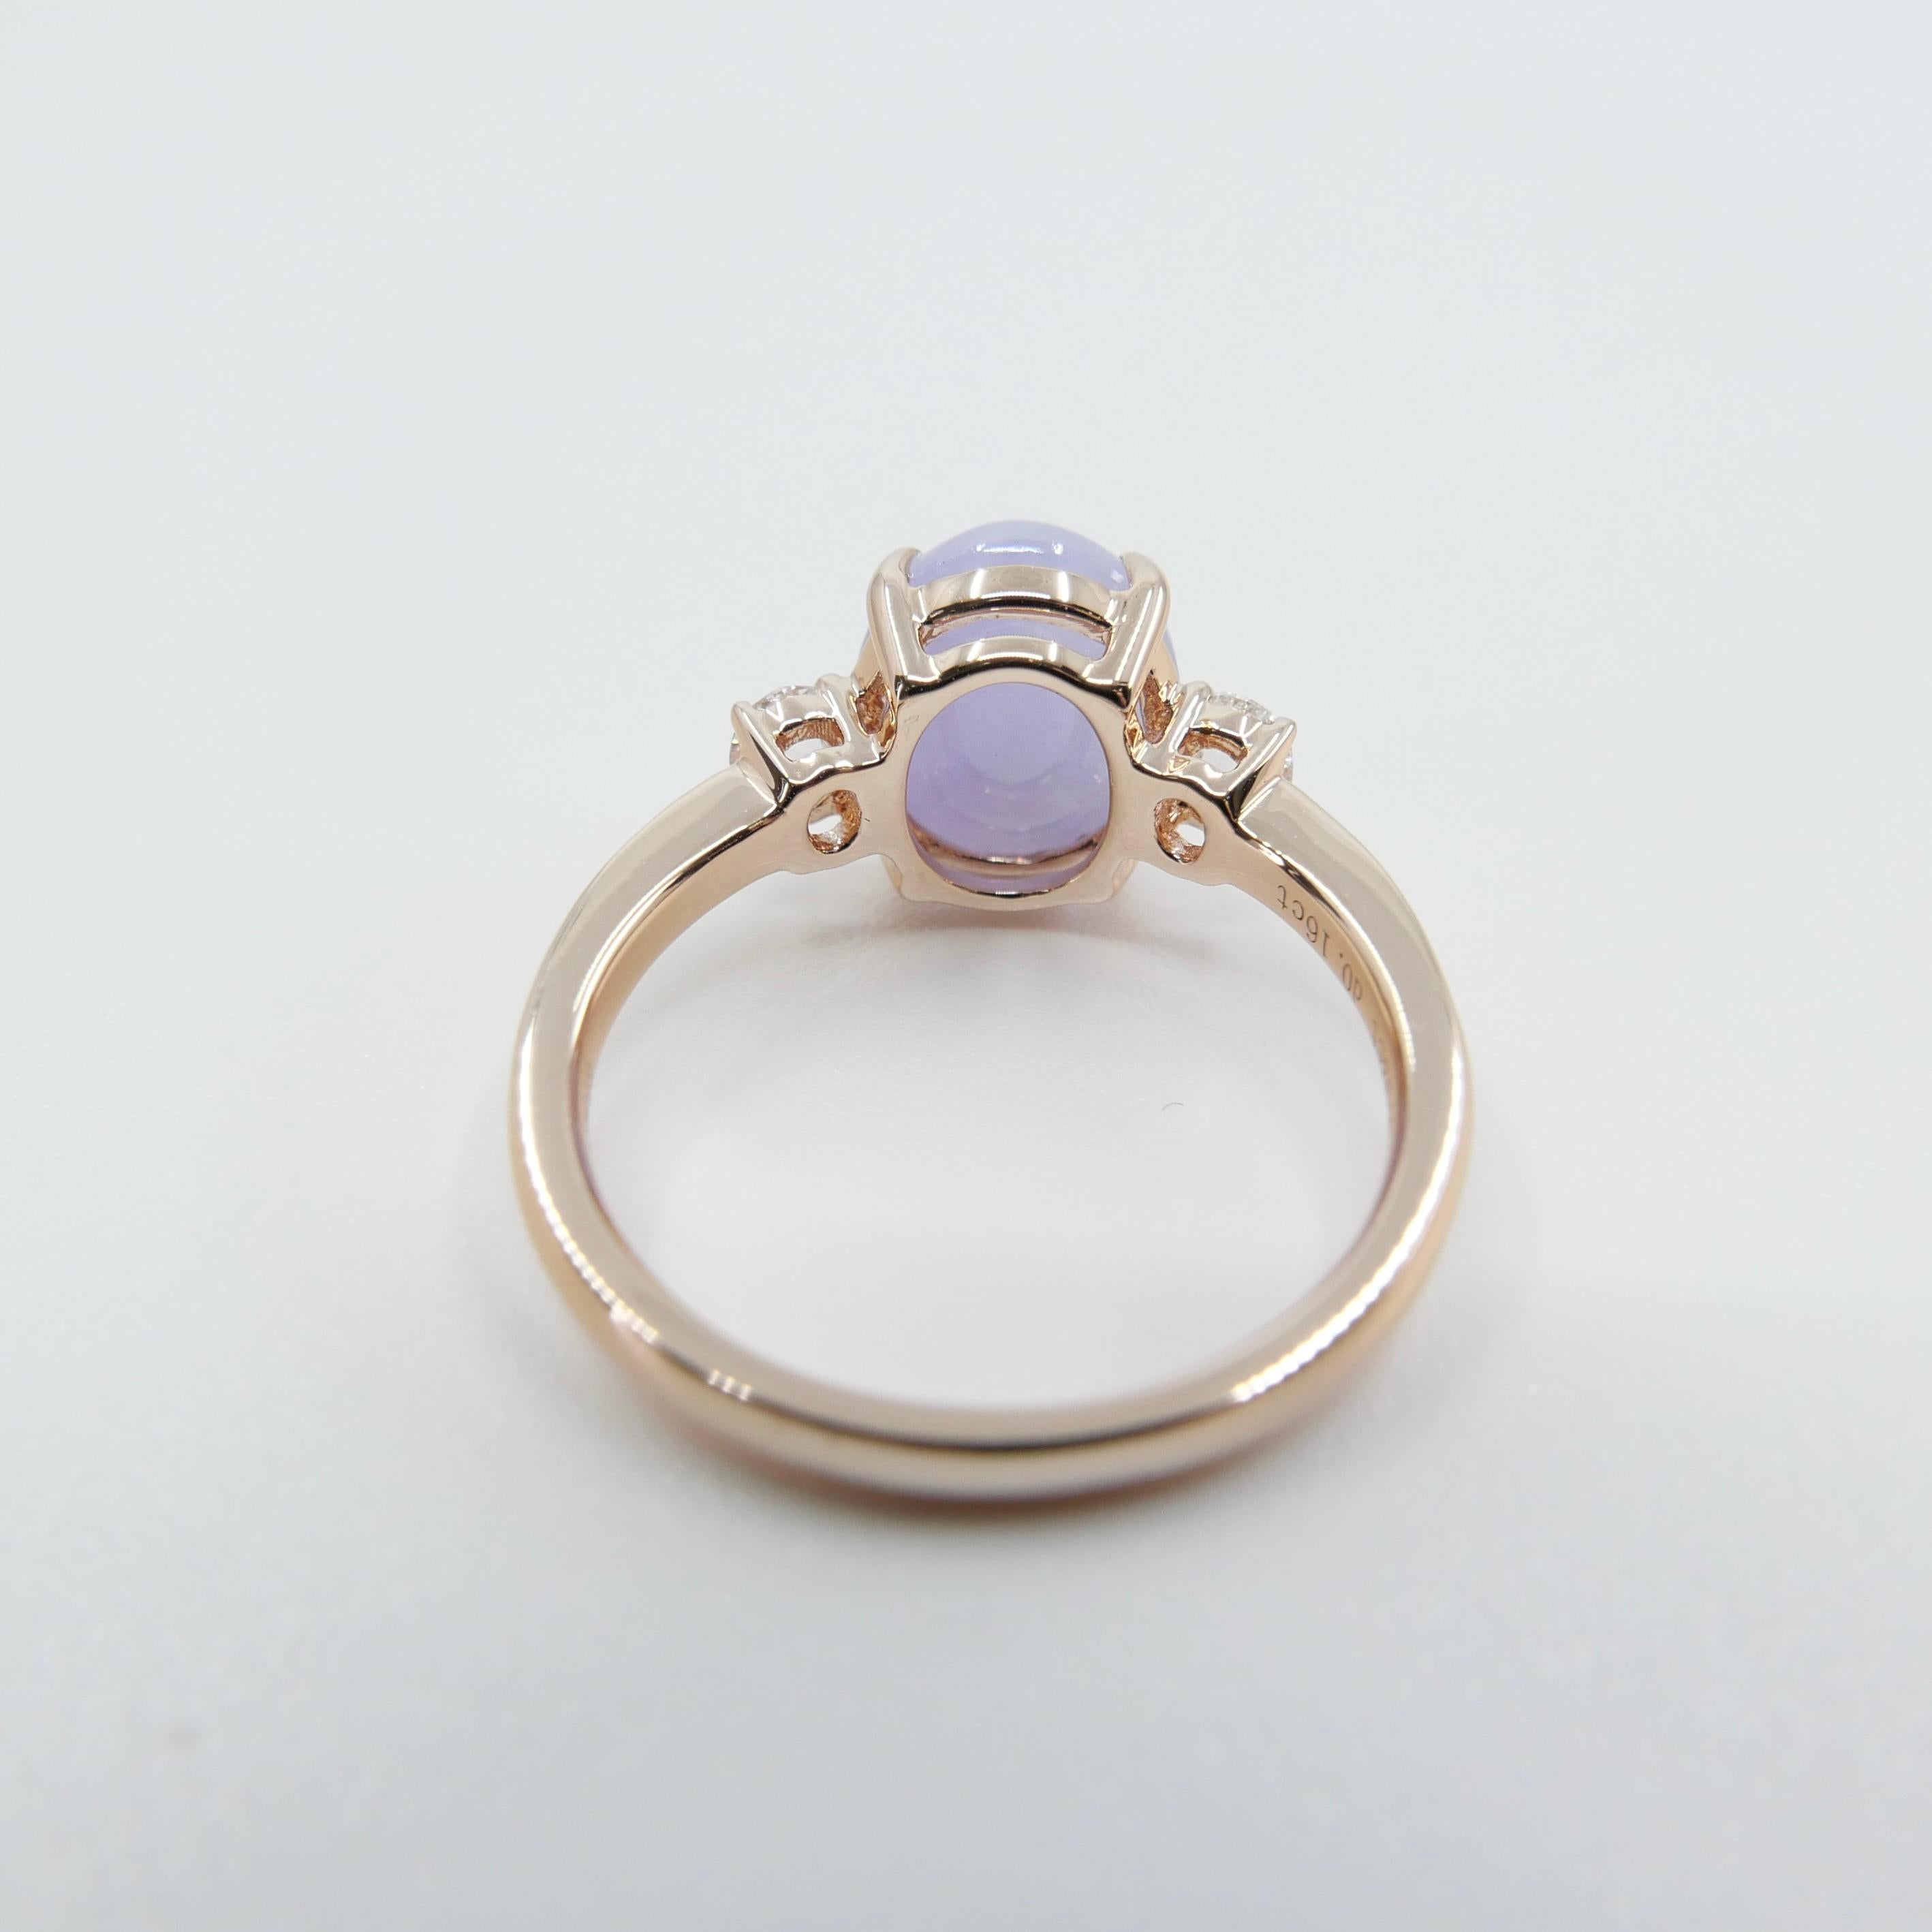 Contemporary Certified 3.48cts Lavender Jade & Rose Cut Diamond 3 Stone Ring, 18k Rose Gold For Sale